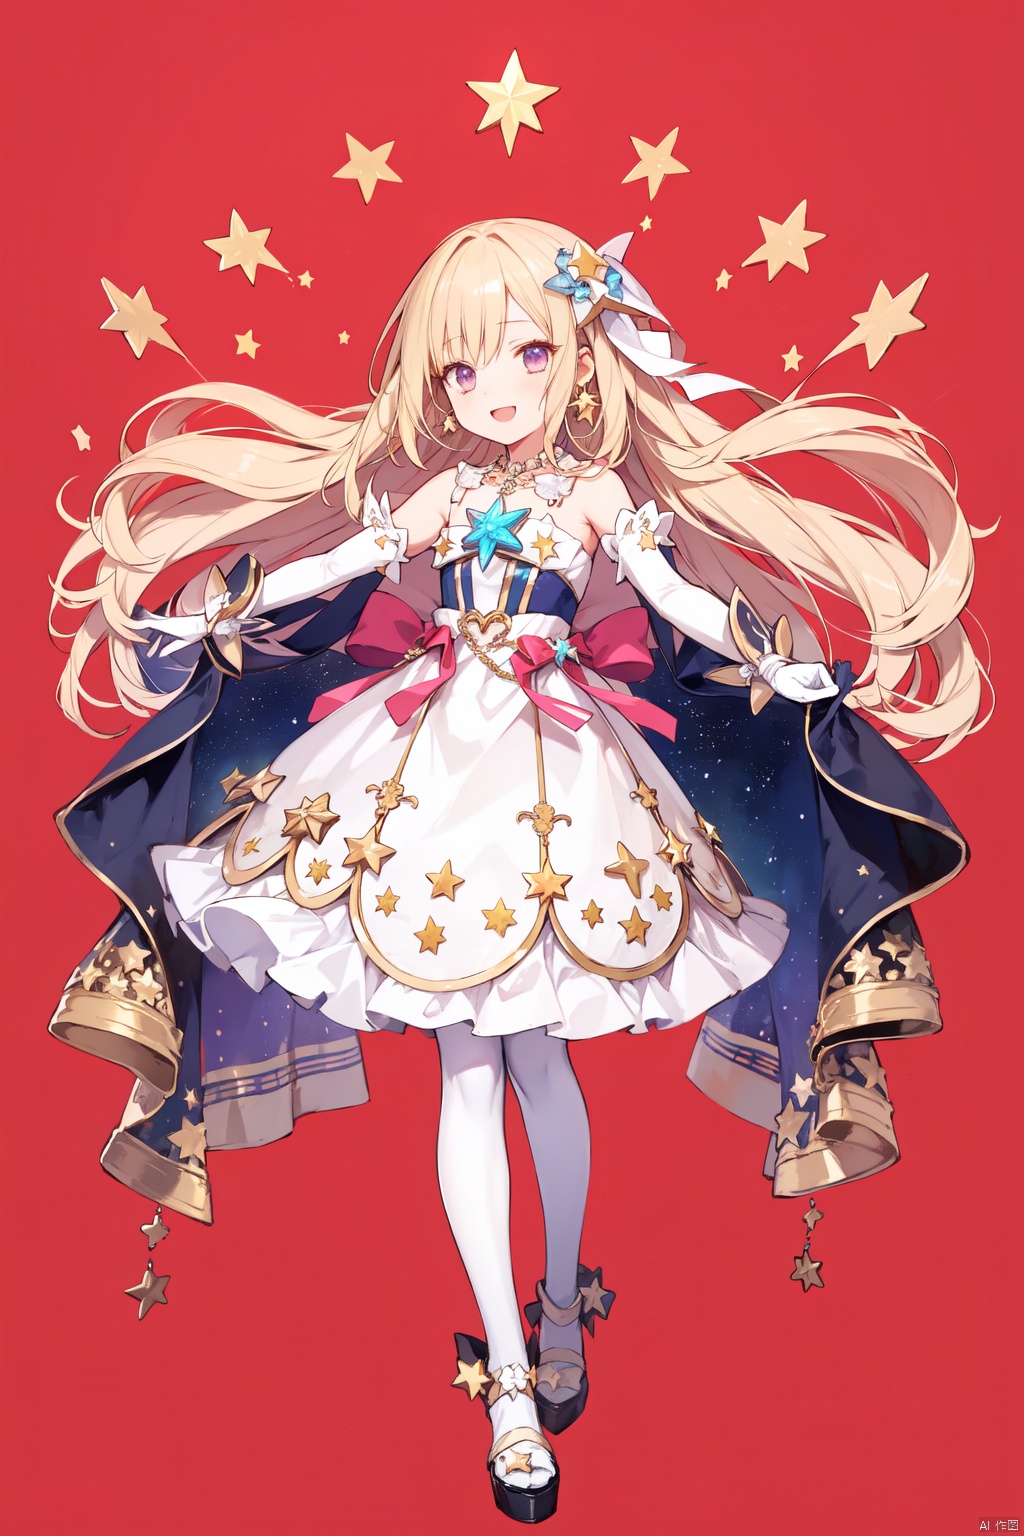  1girl, blonde_hair, dress, elbow_gloves, full_body, gloves, long_hair, magical_girl, open_mouth, outstretched_arms, pink_background, red_background, saint_quartz_\(fate\), smile, solo, standing, star_\(symbol\), star_earrings, star_hair_ornament, star_necklace, star_pasties, star_print, starfish, starry_background, very_long_hair, white_dress, white_gloves, white_legwear